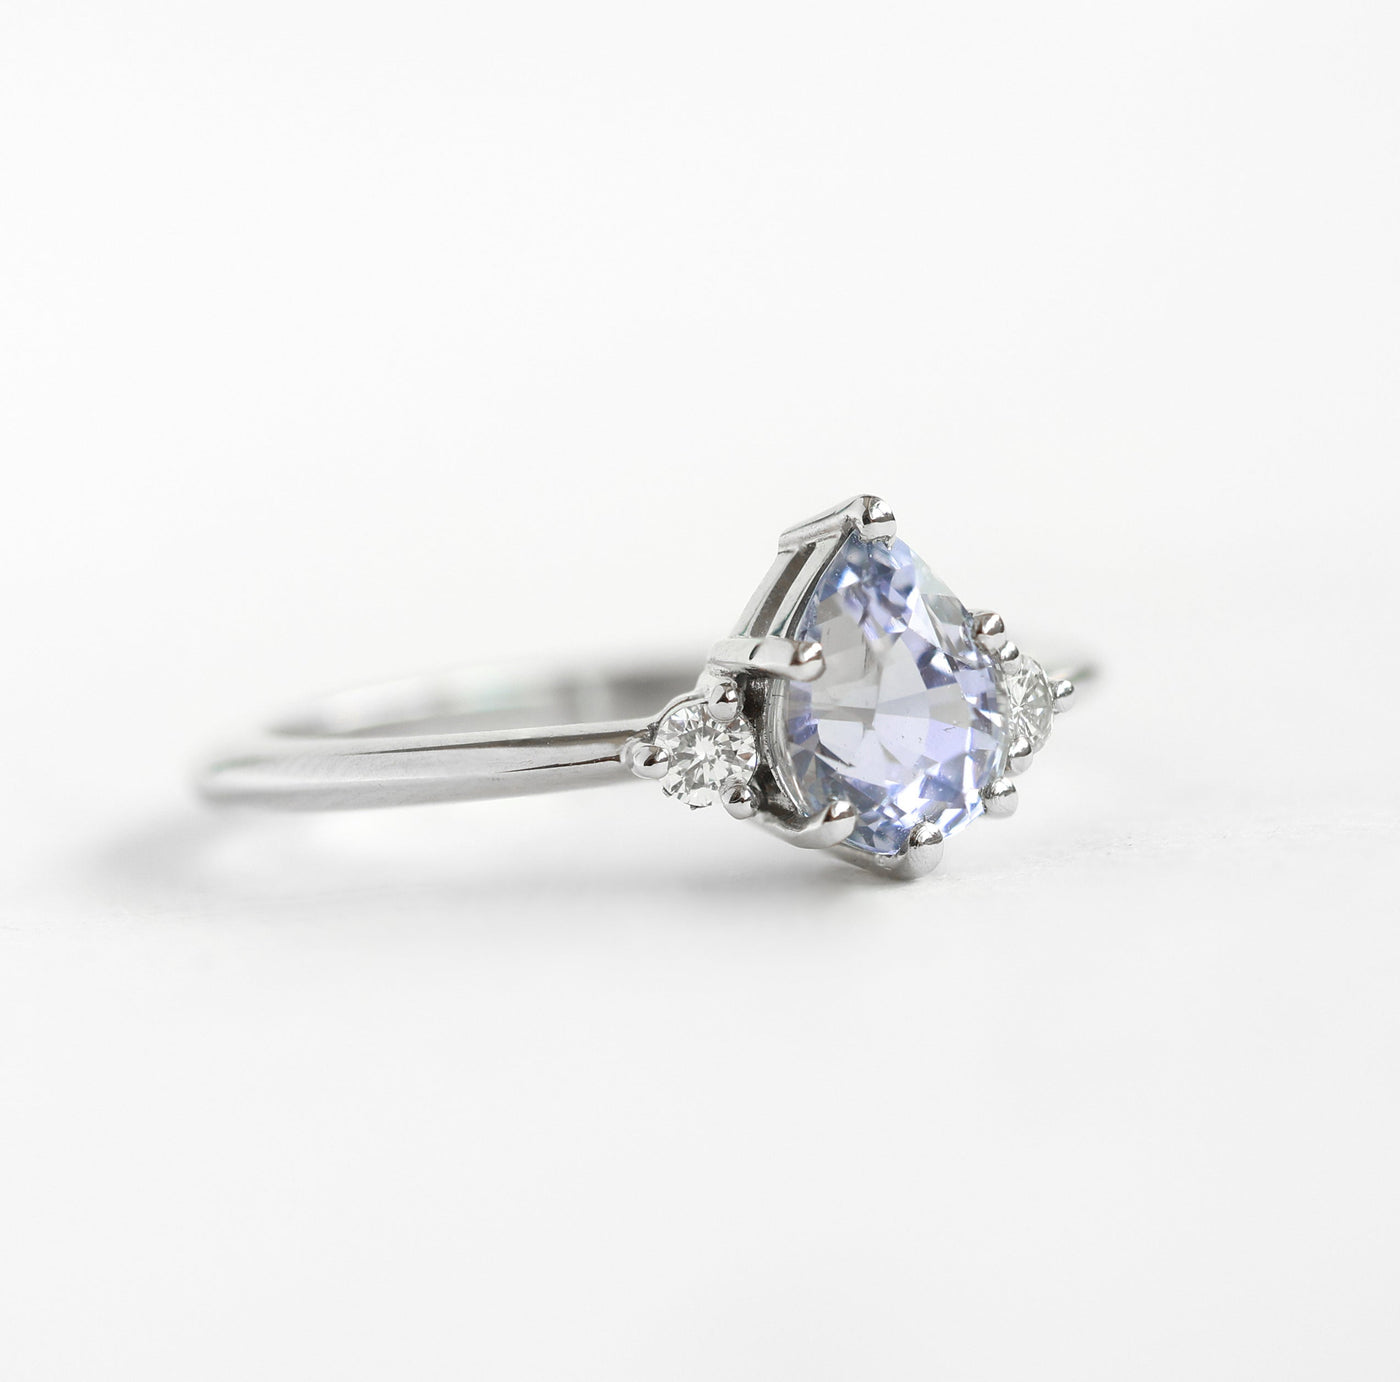 Pear-shaped lavender sapphire ring with side diamonds